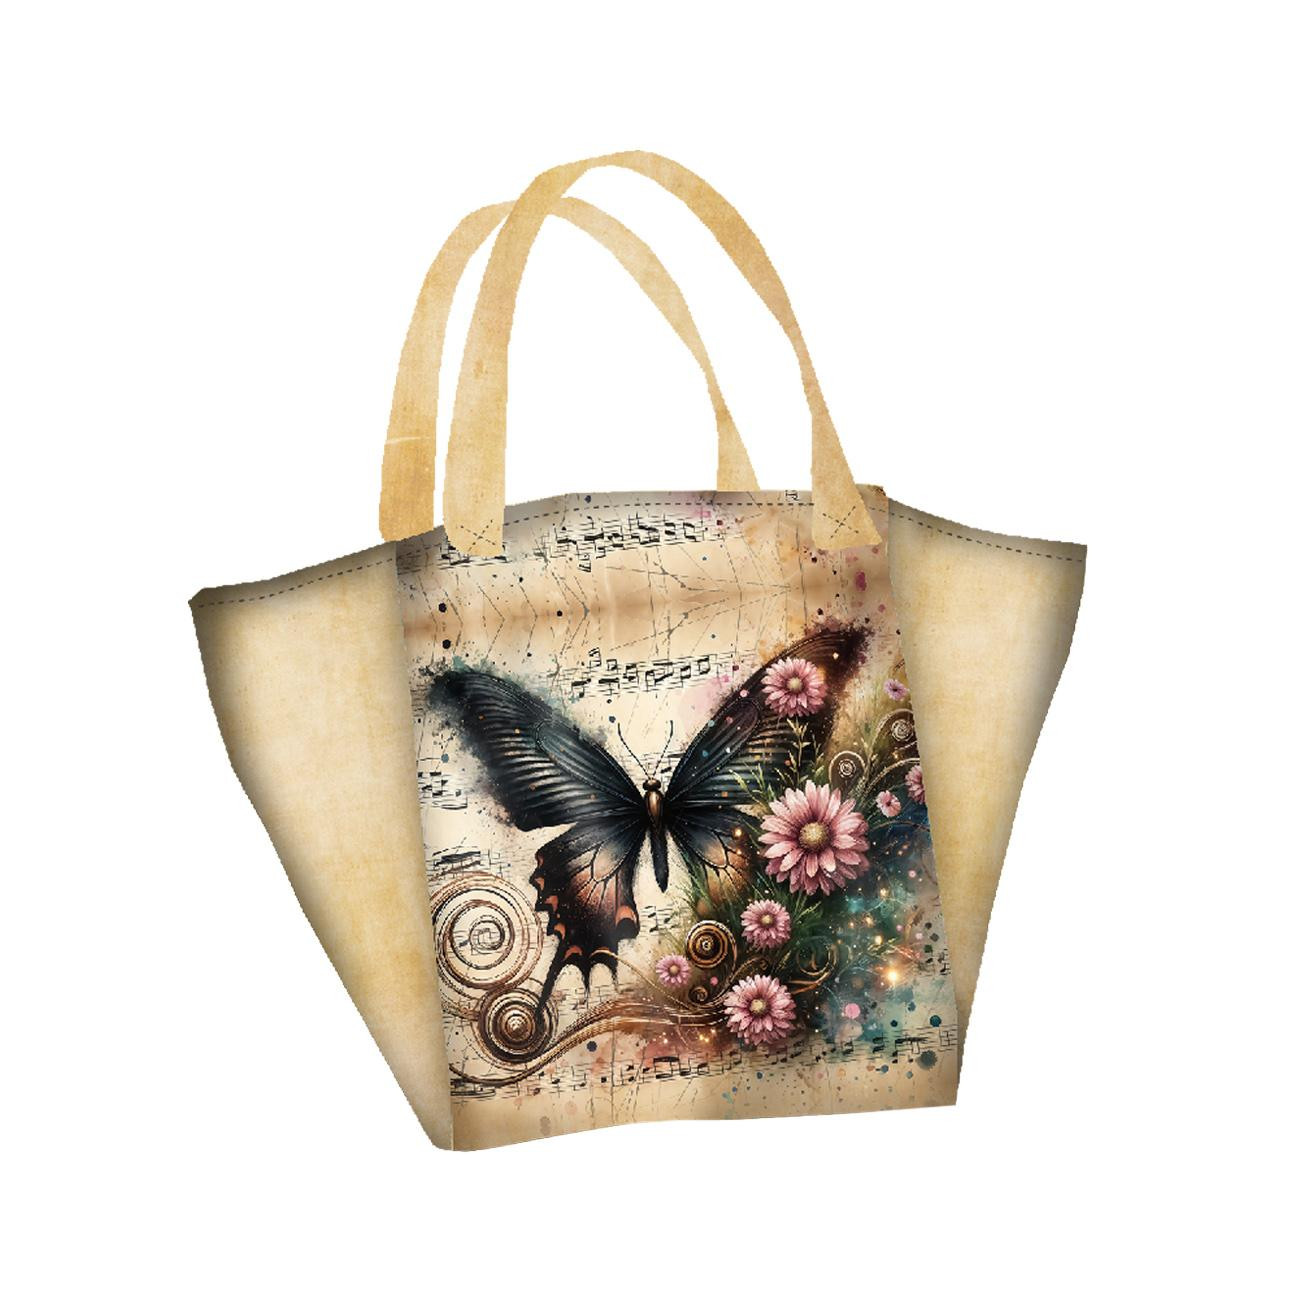 XL bag with in-bag pouch 2 in 1 - BUTTERFLY MUSIC - sewing set